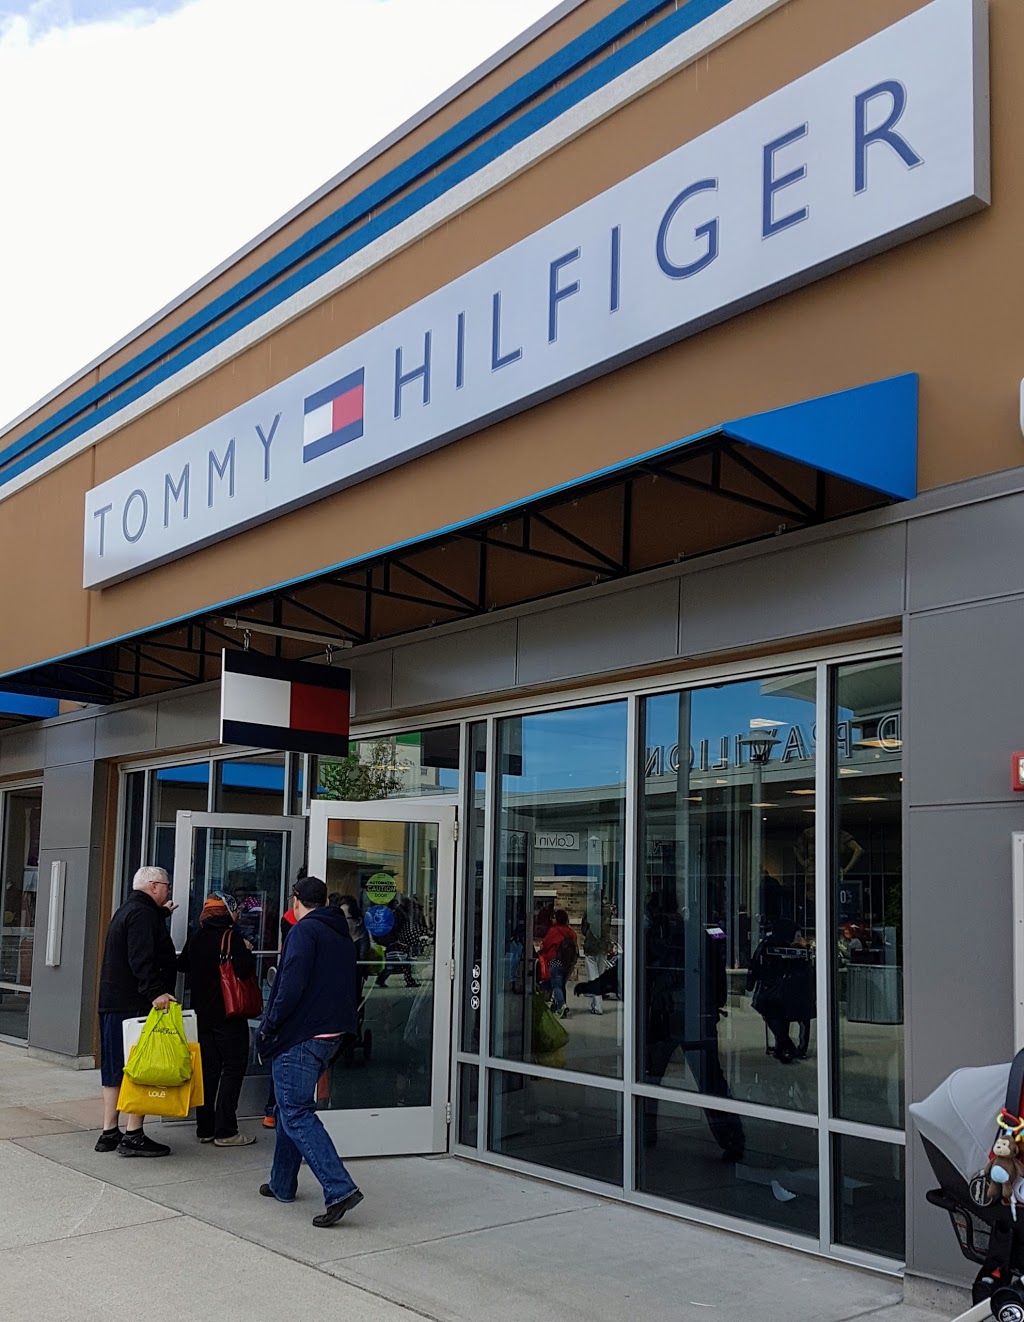 tommy hilfiger toronto premium outlet mall